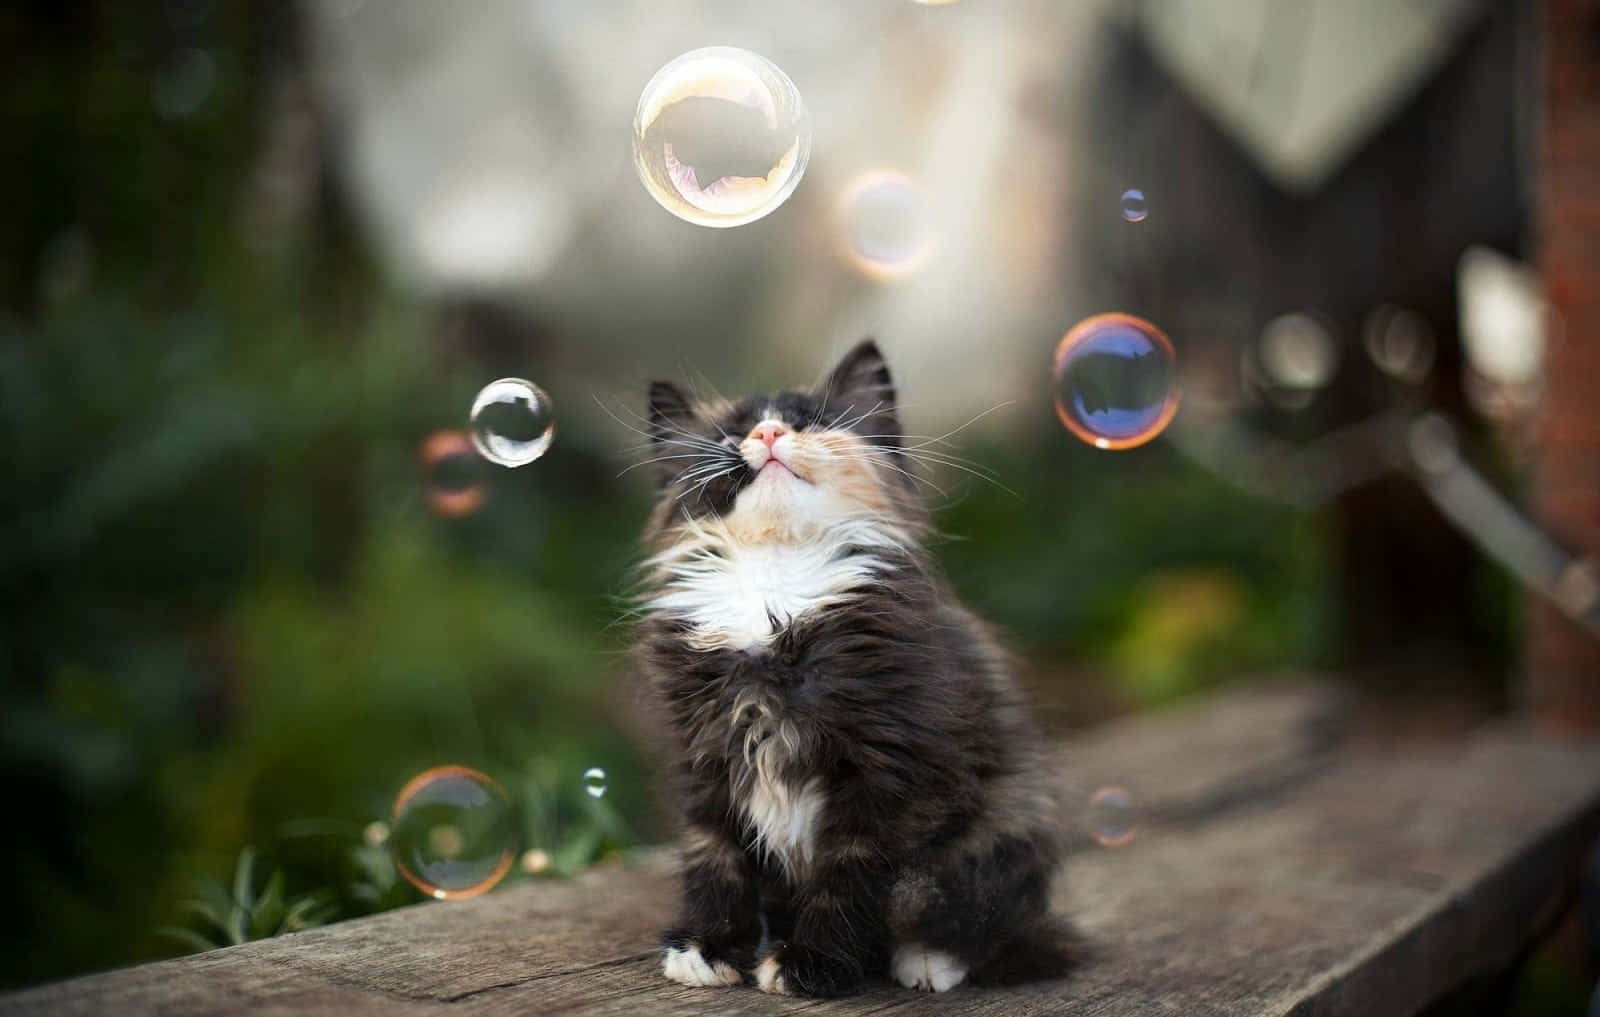 Capture the Joy - Just imagine yourself playing in a field of beautiful bubbles